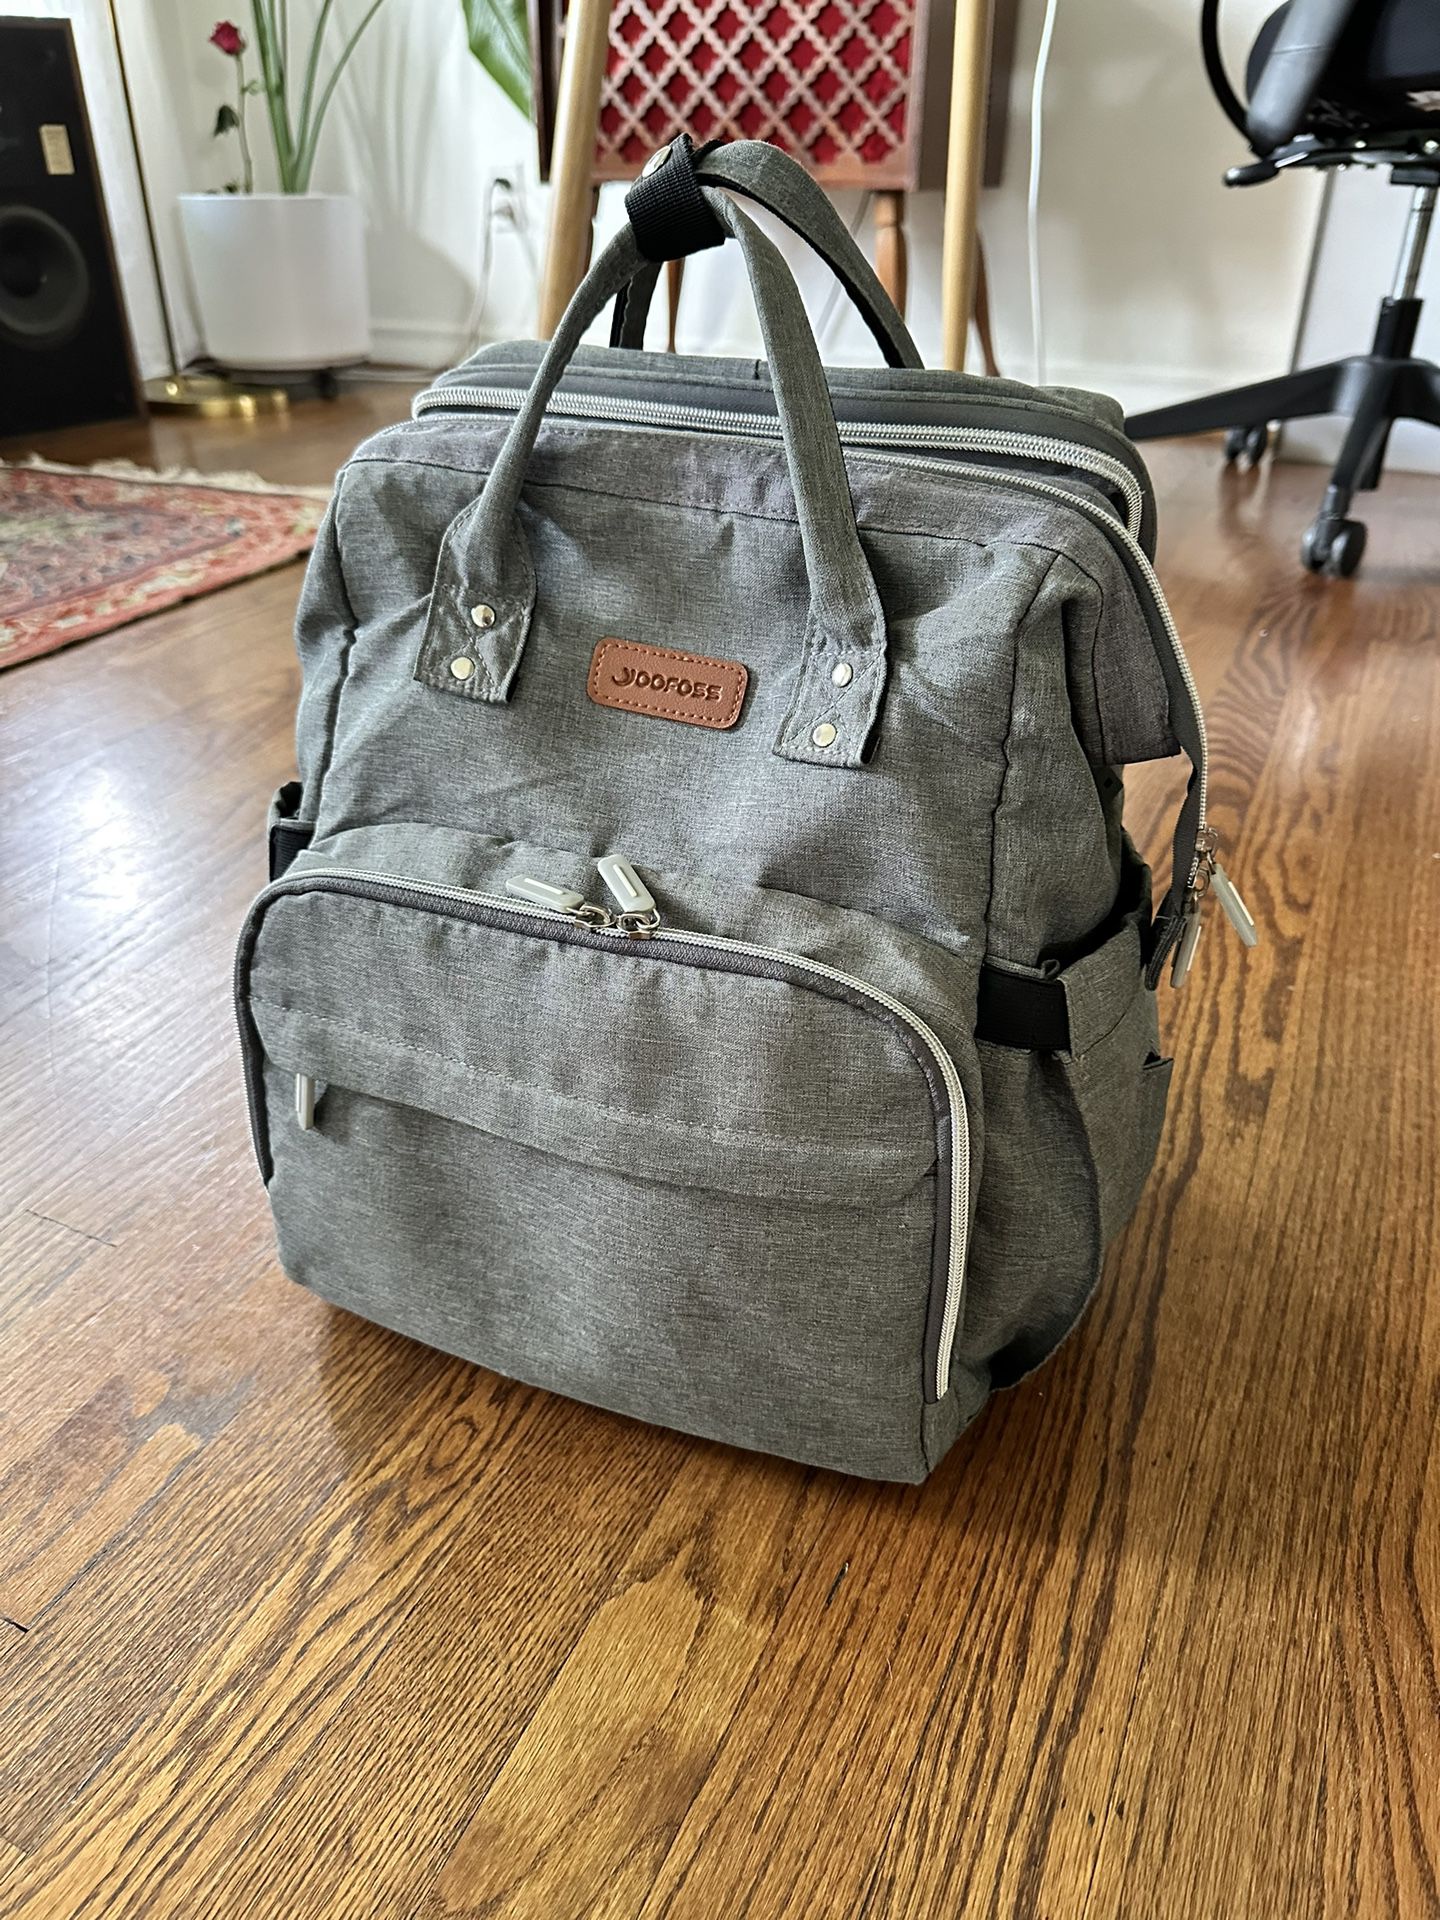 Diaper Bag w/ Napping And Changing Station